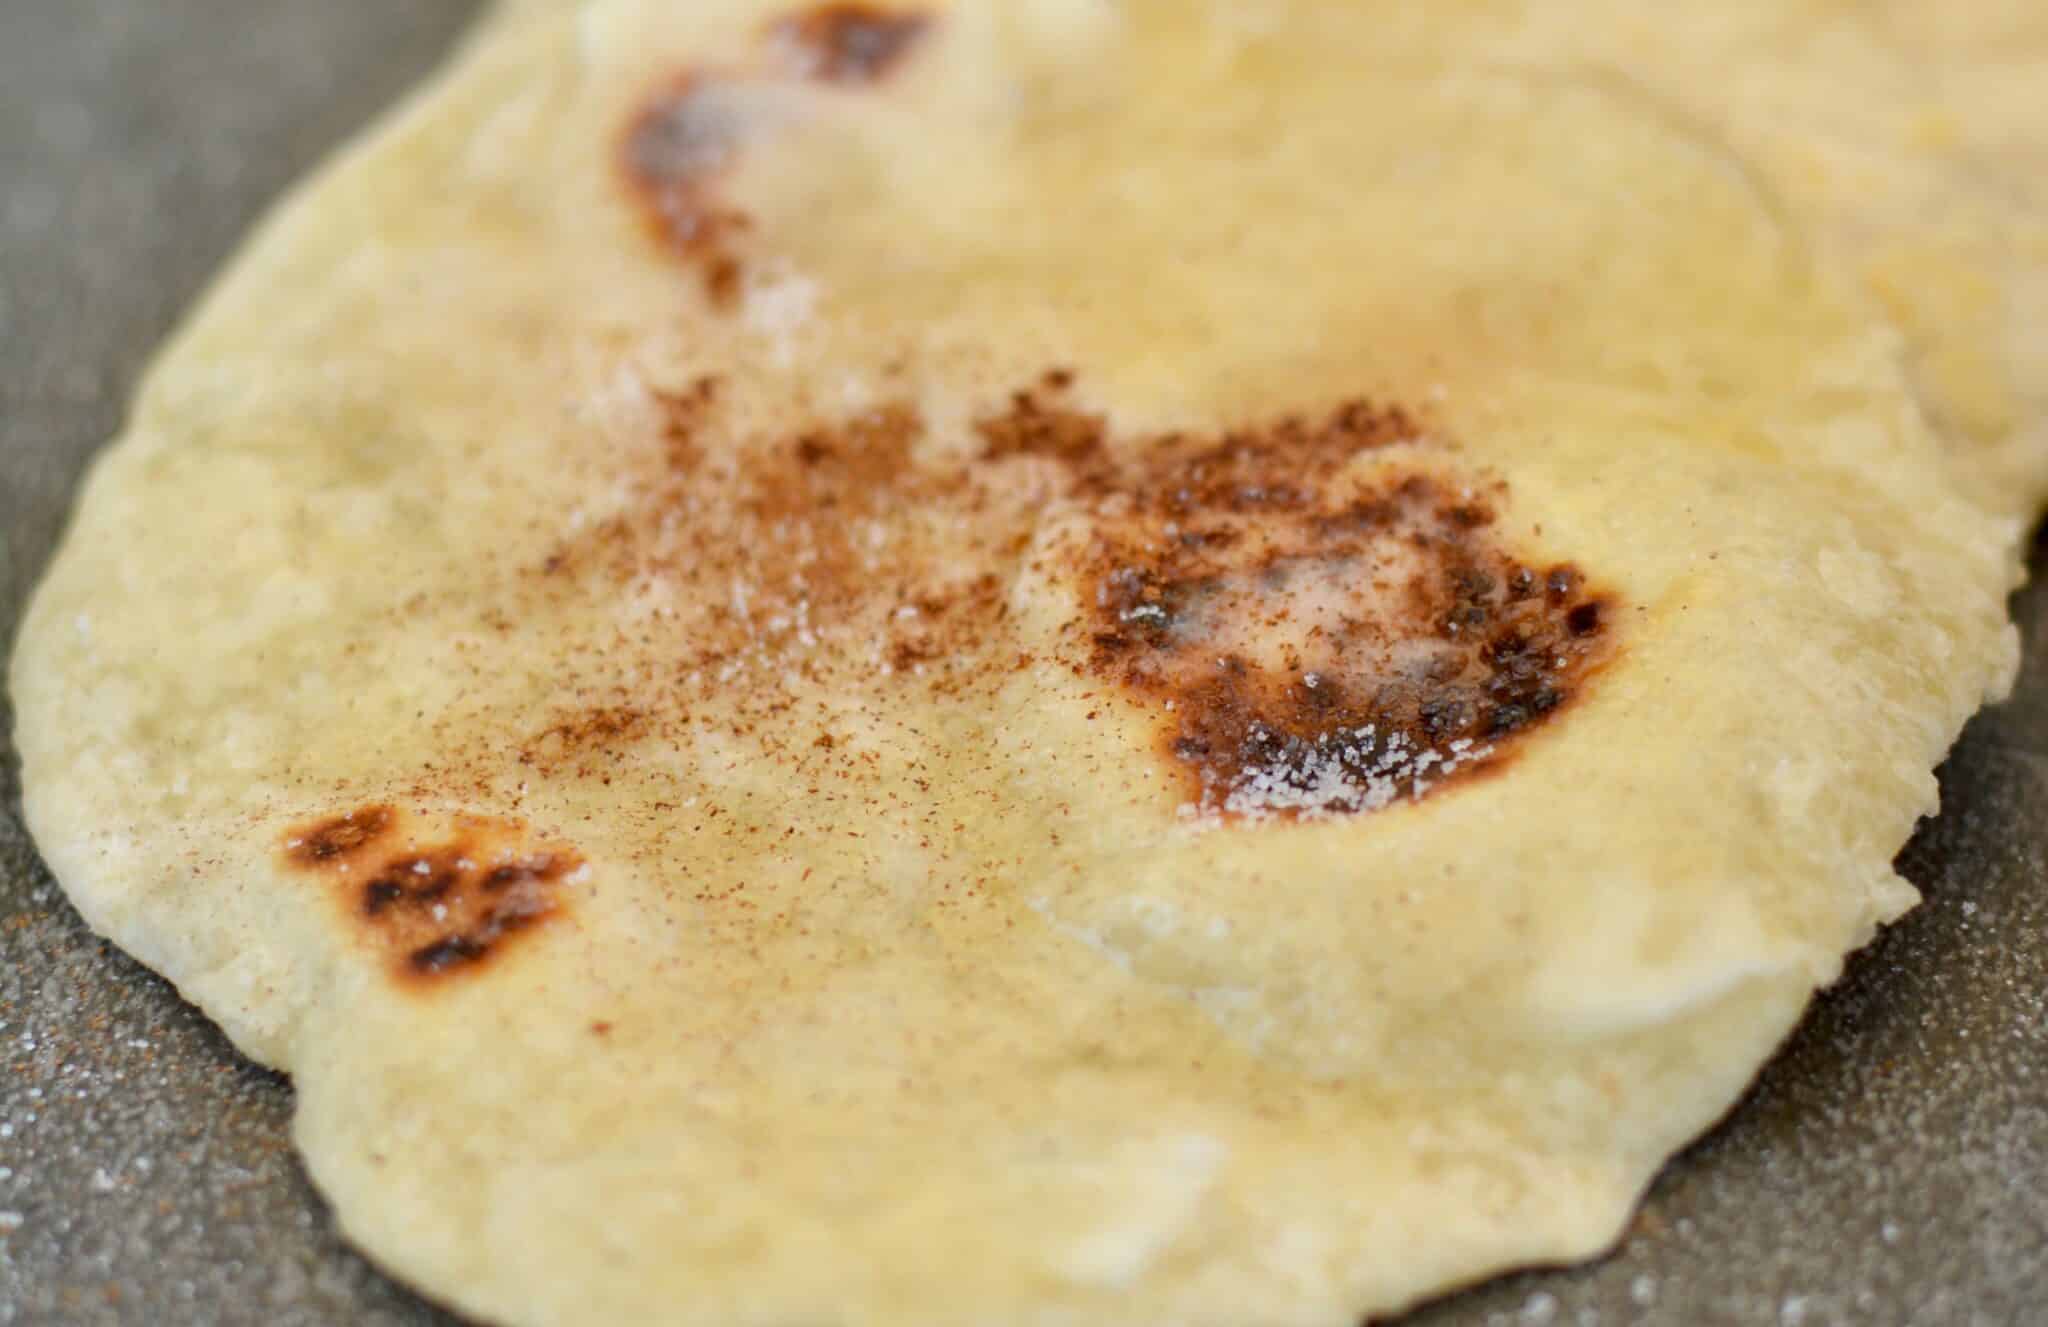 Warm fresh homemade tortillas melt in your mouth with amazing flavor. Worth the little bit of effort.